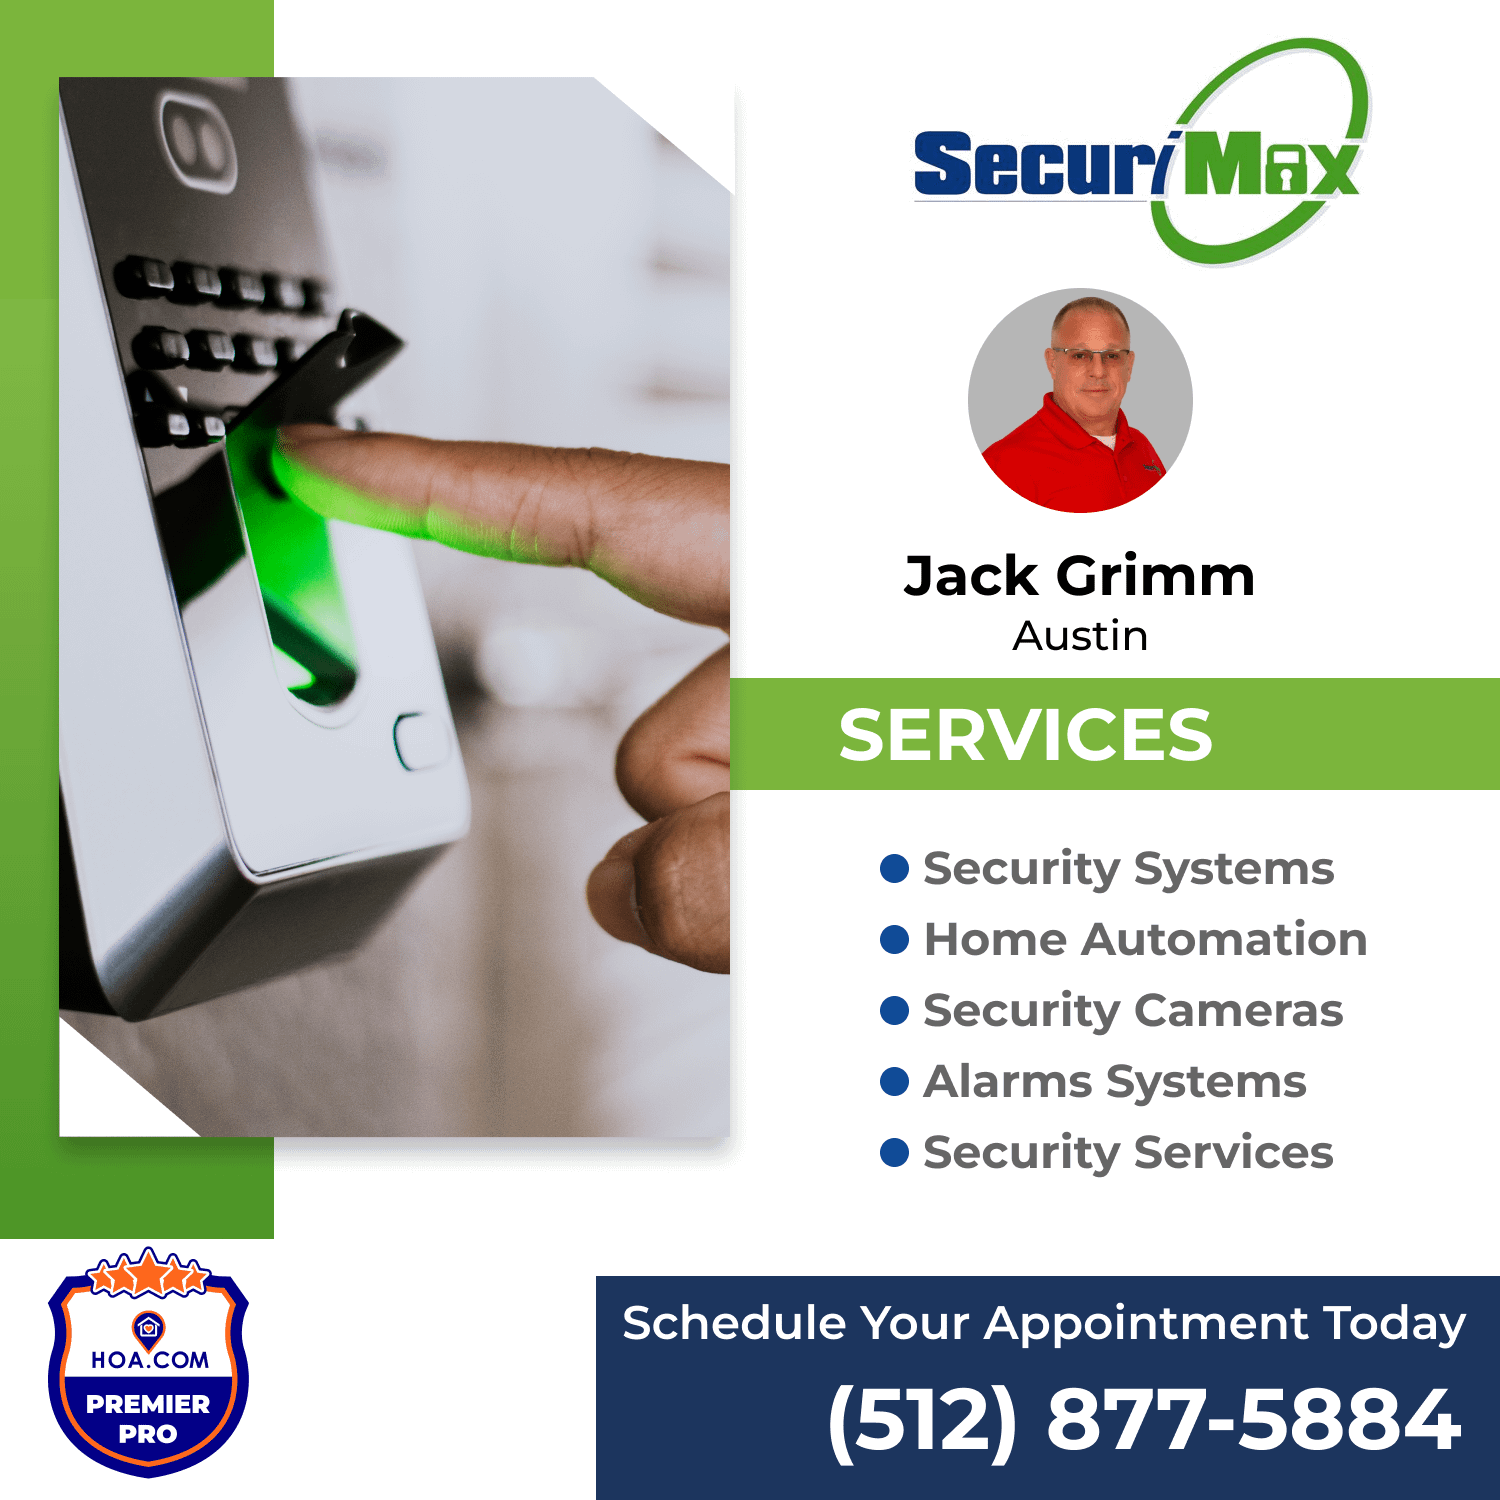 Services by Jack Grimm of SecuriMAX